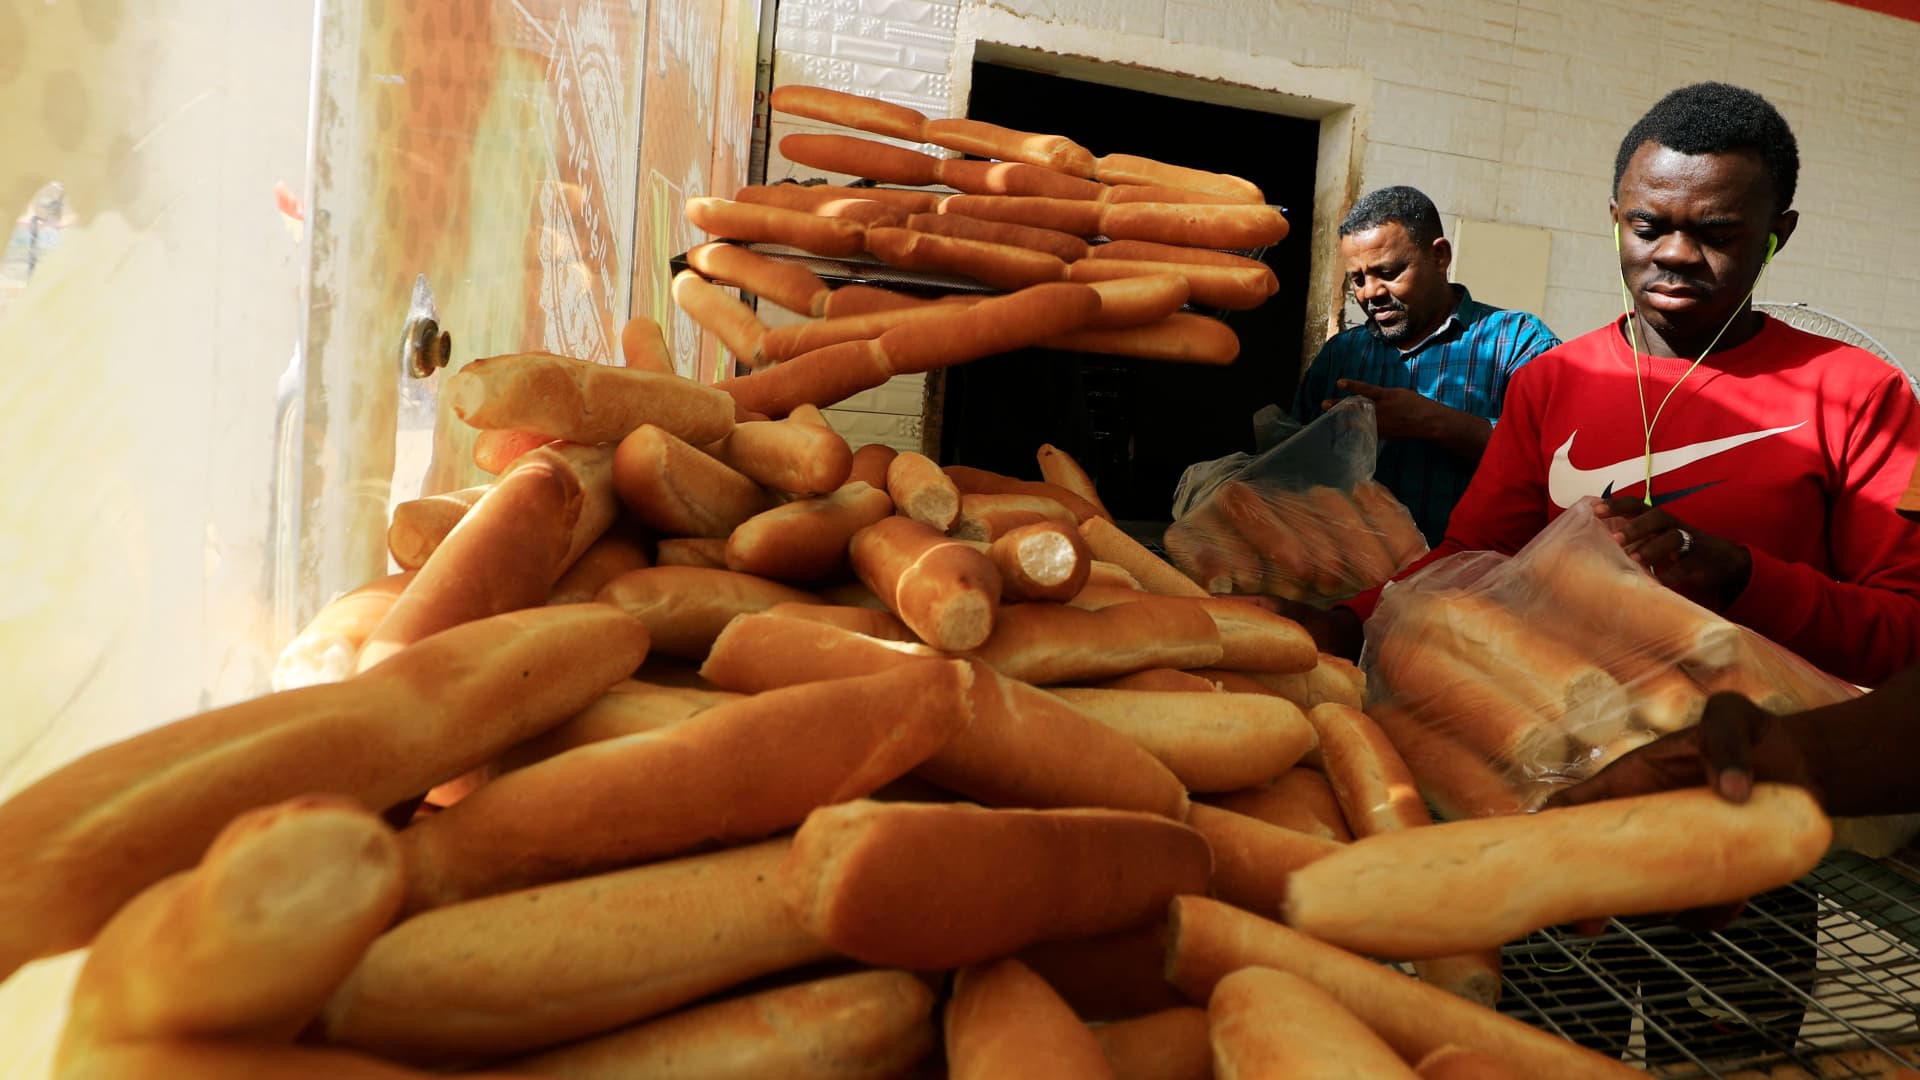 Employees package bread at a bakery in Khartoum's al-Matar district, on March 17, 2022 as food prices rise across Sudan and the region due to the conflict in Ukraine.